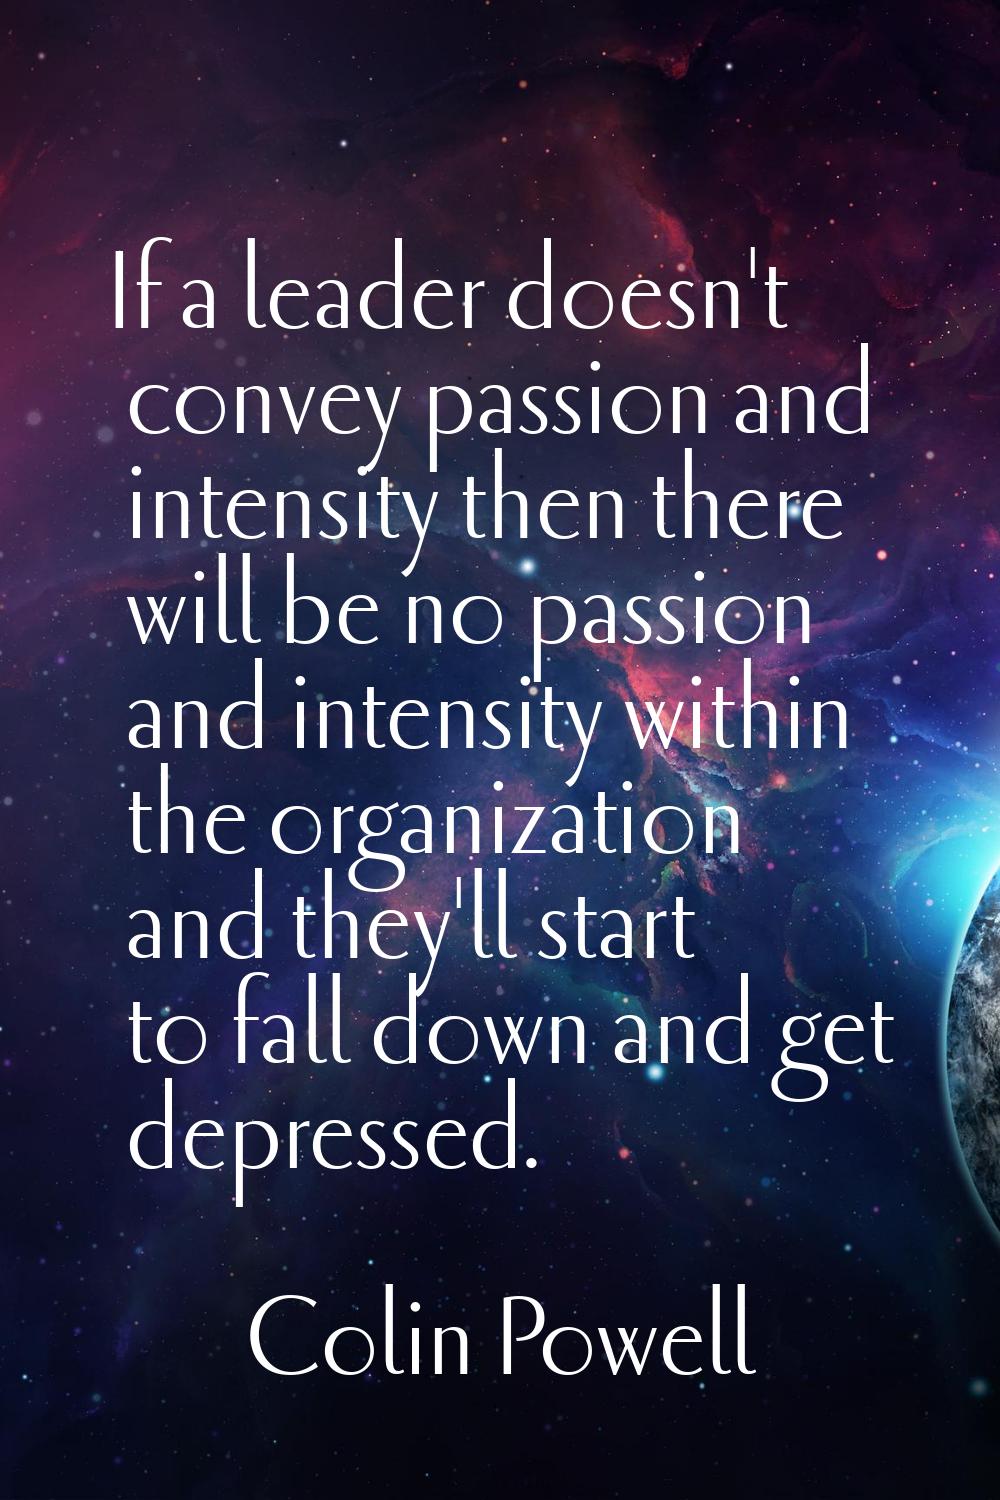 If a leader doesn't convey passion and intensity then there will be no passion and intensity within